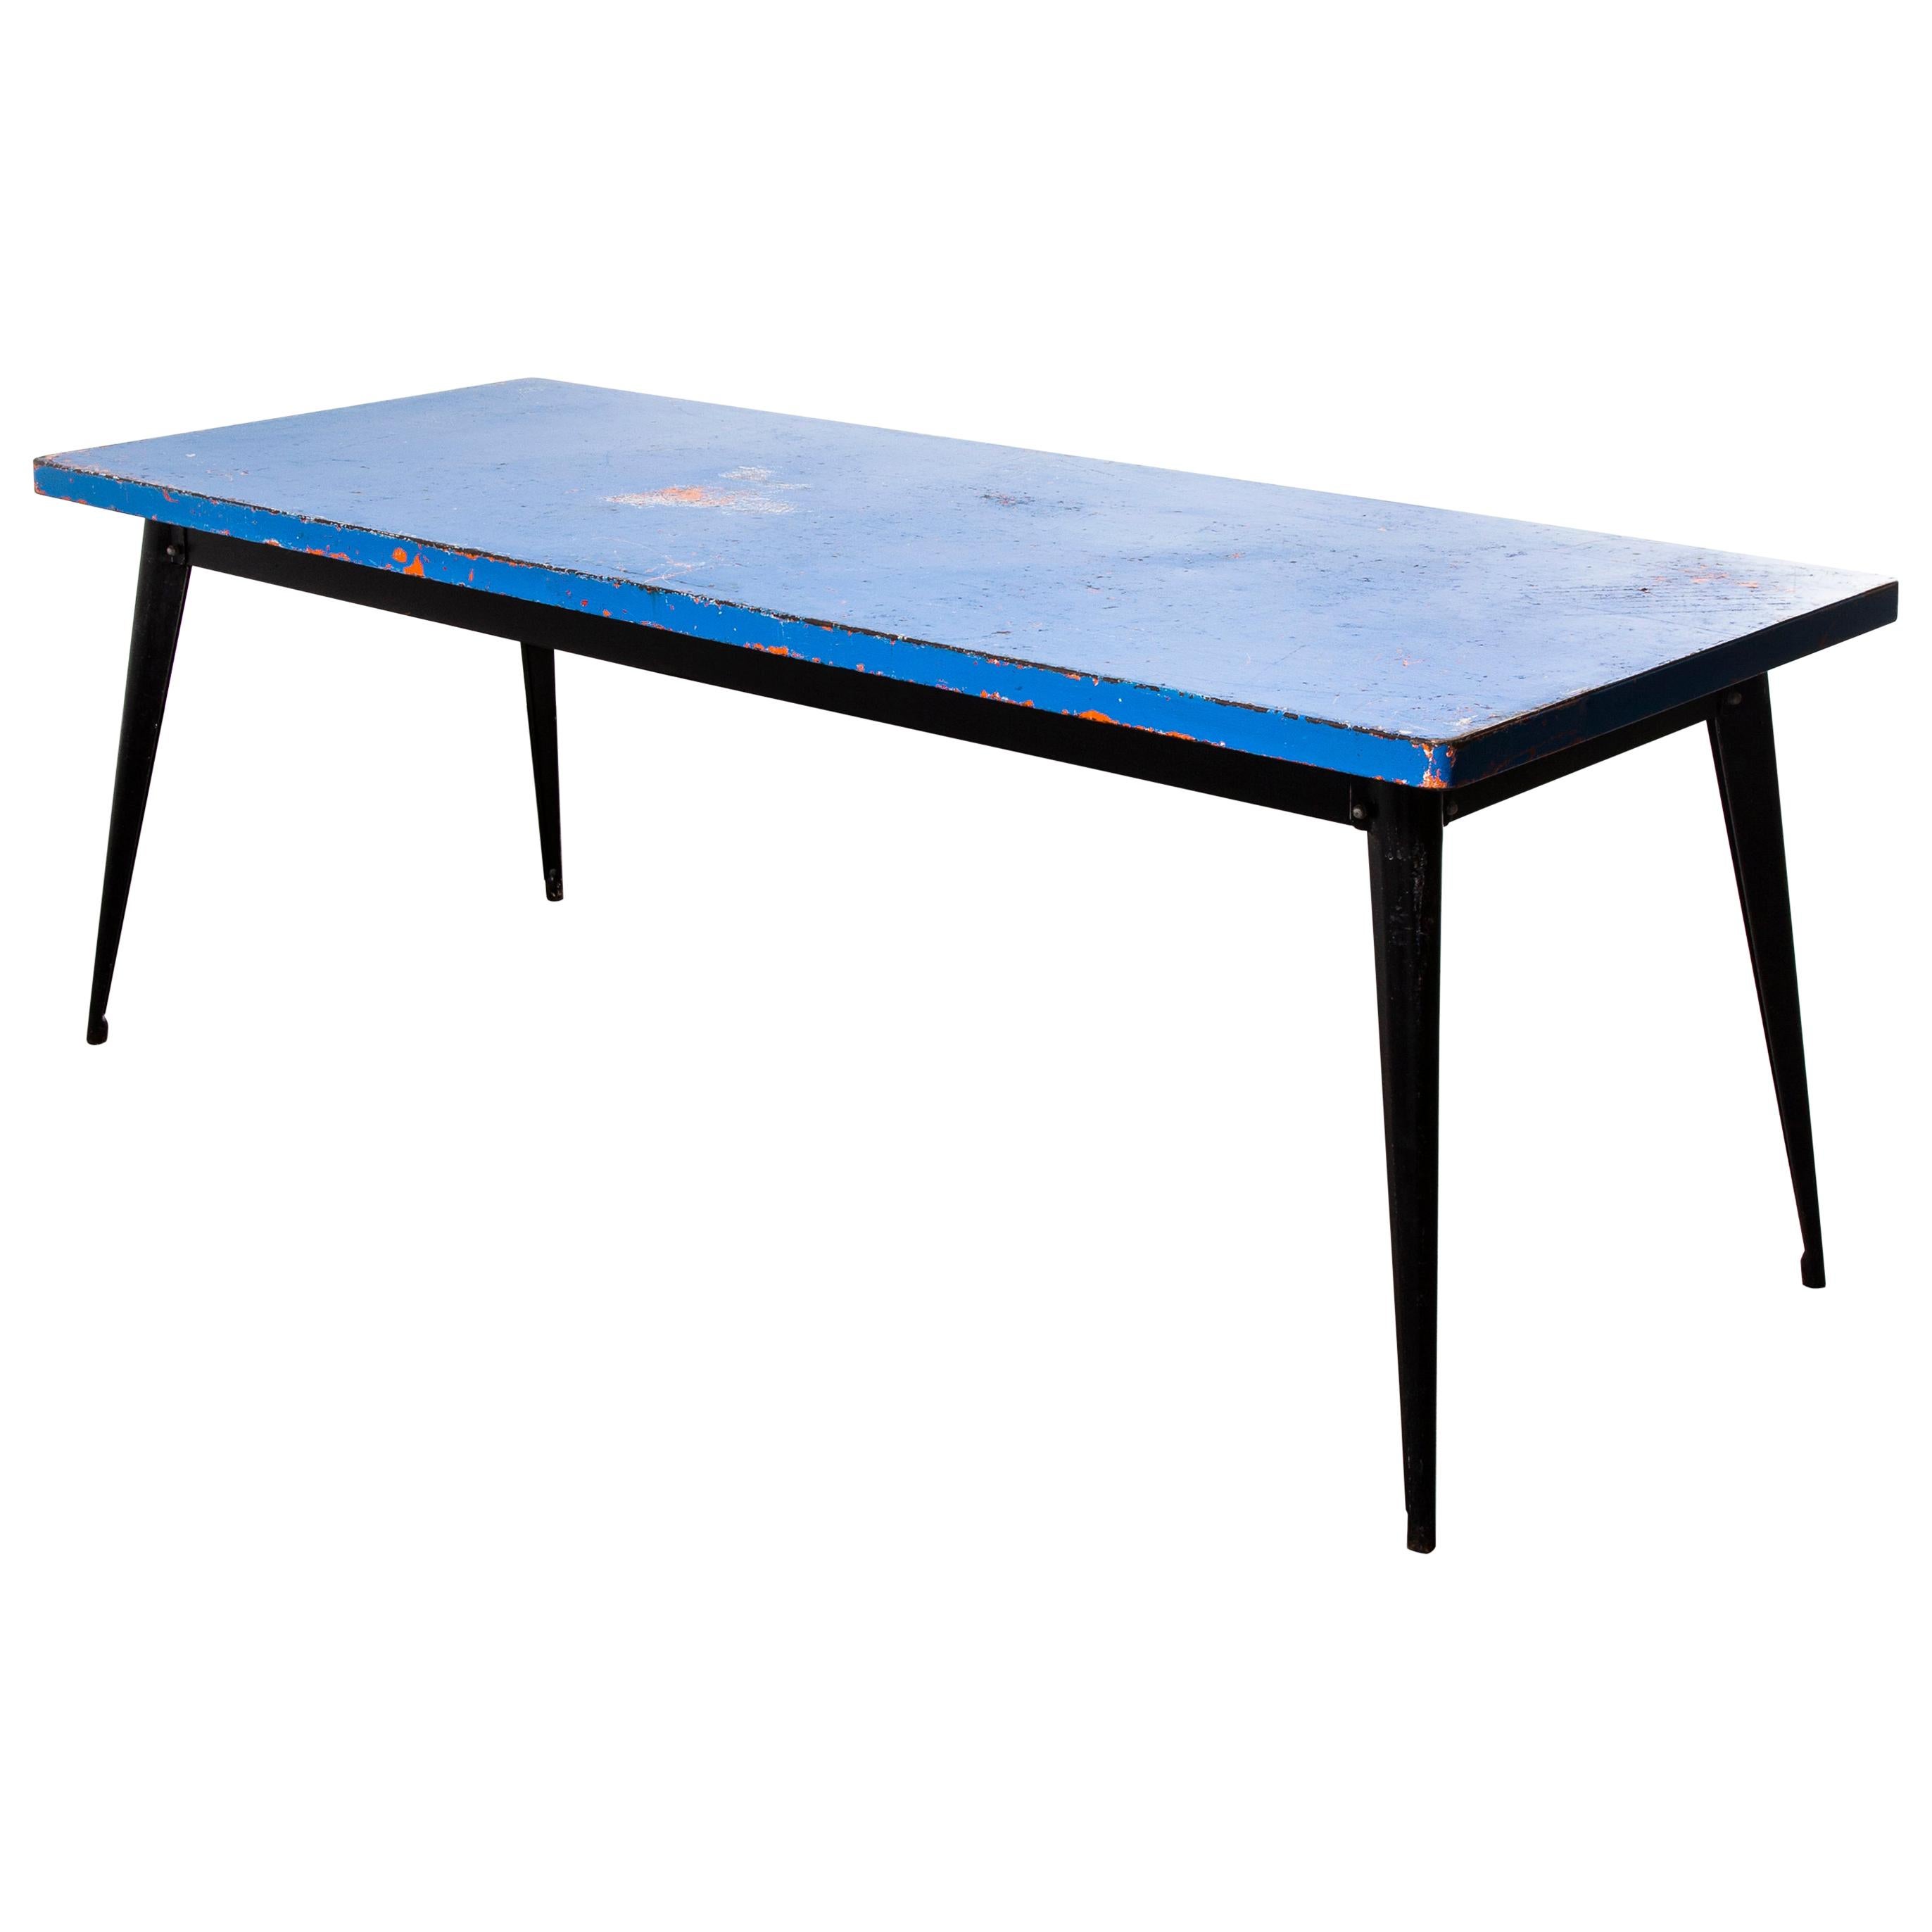 1960's Original French T55 Tolix Rectangular Two Metre Dining Table, Blue Top